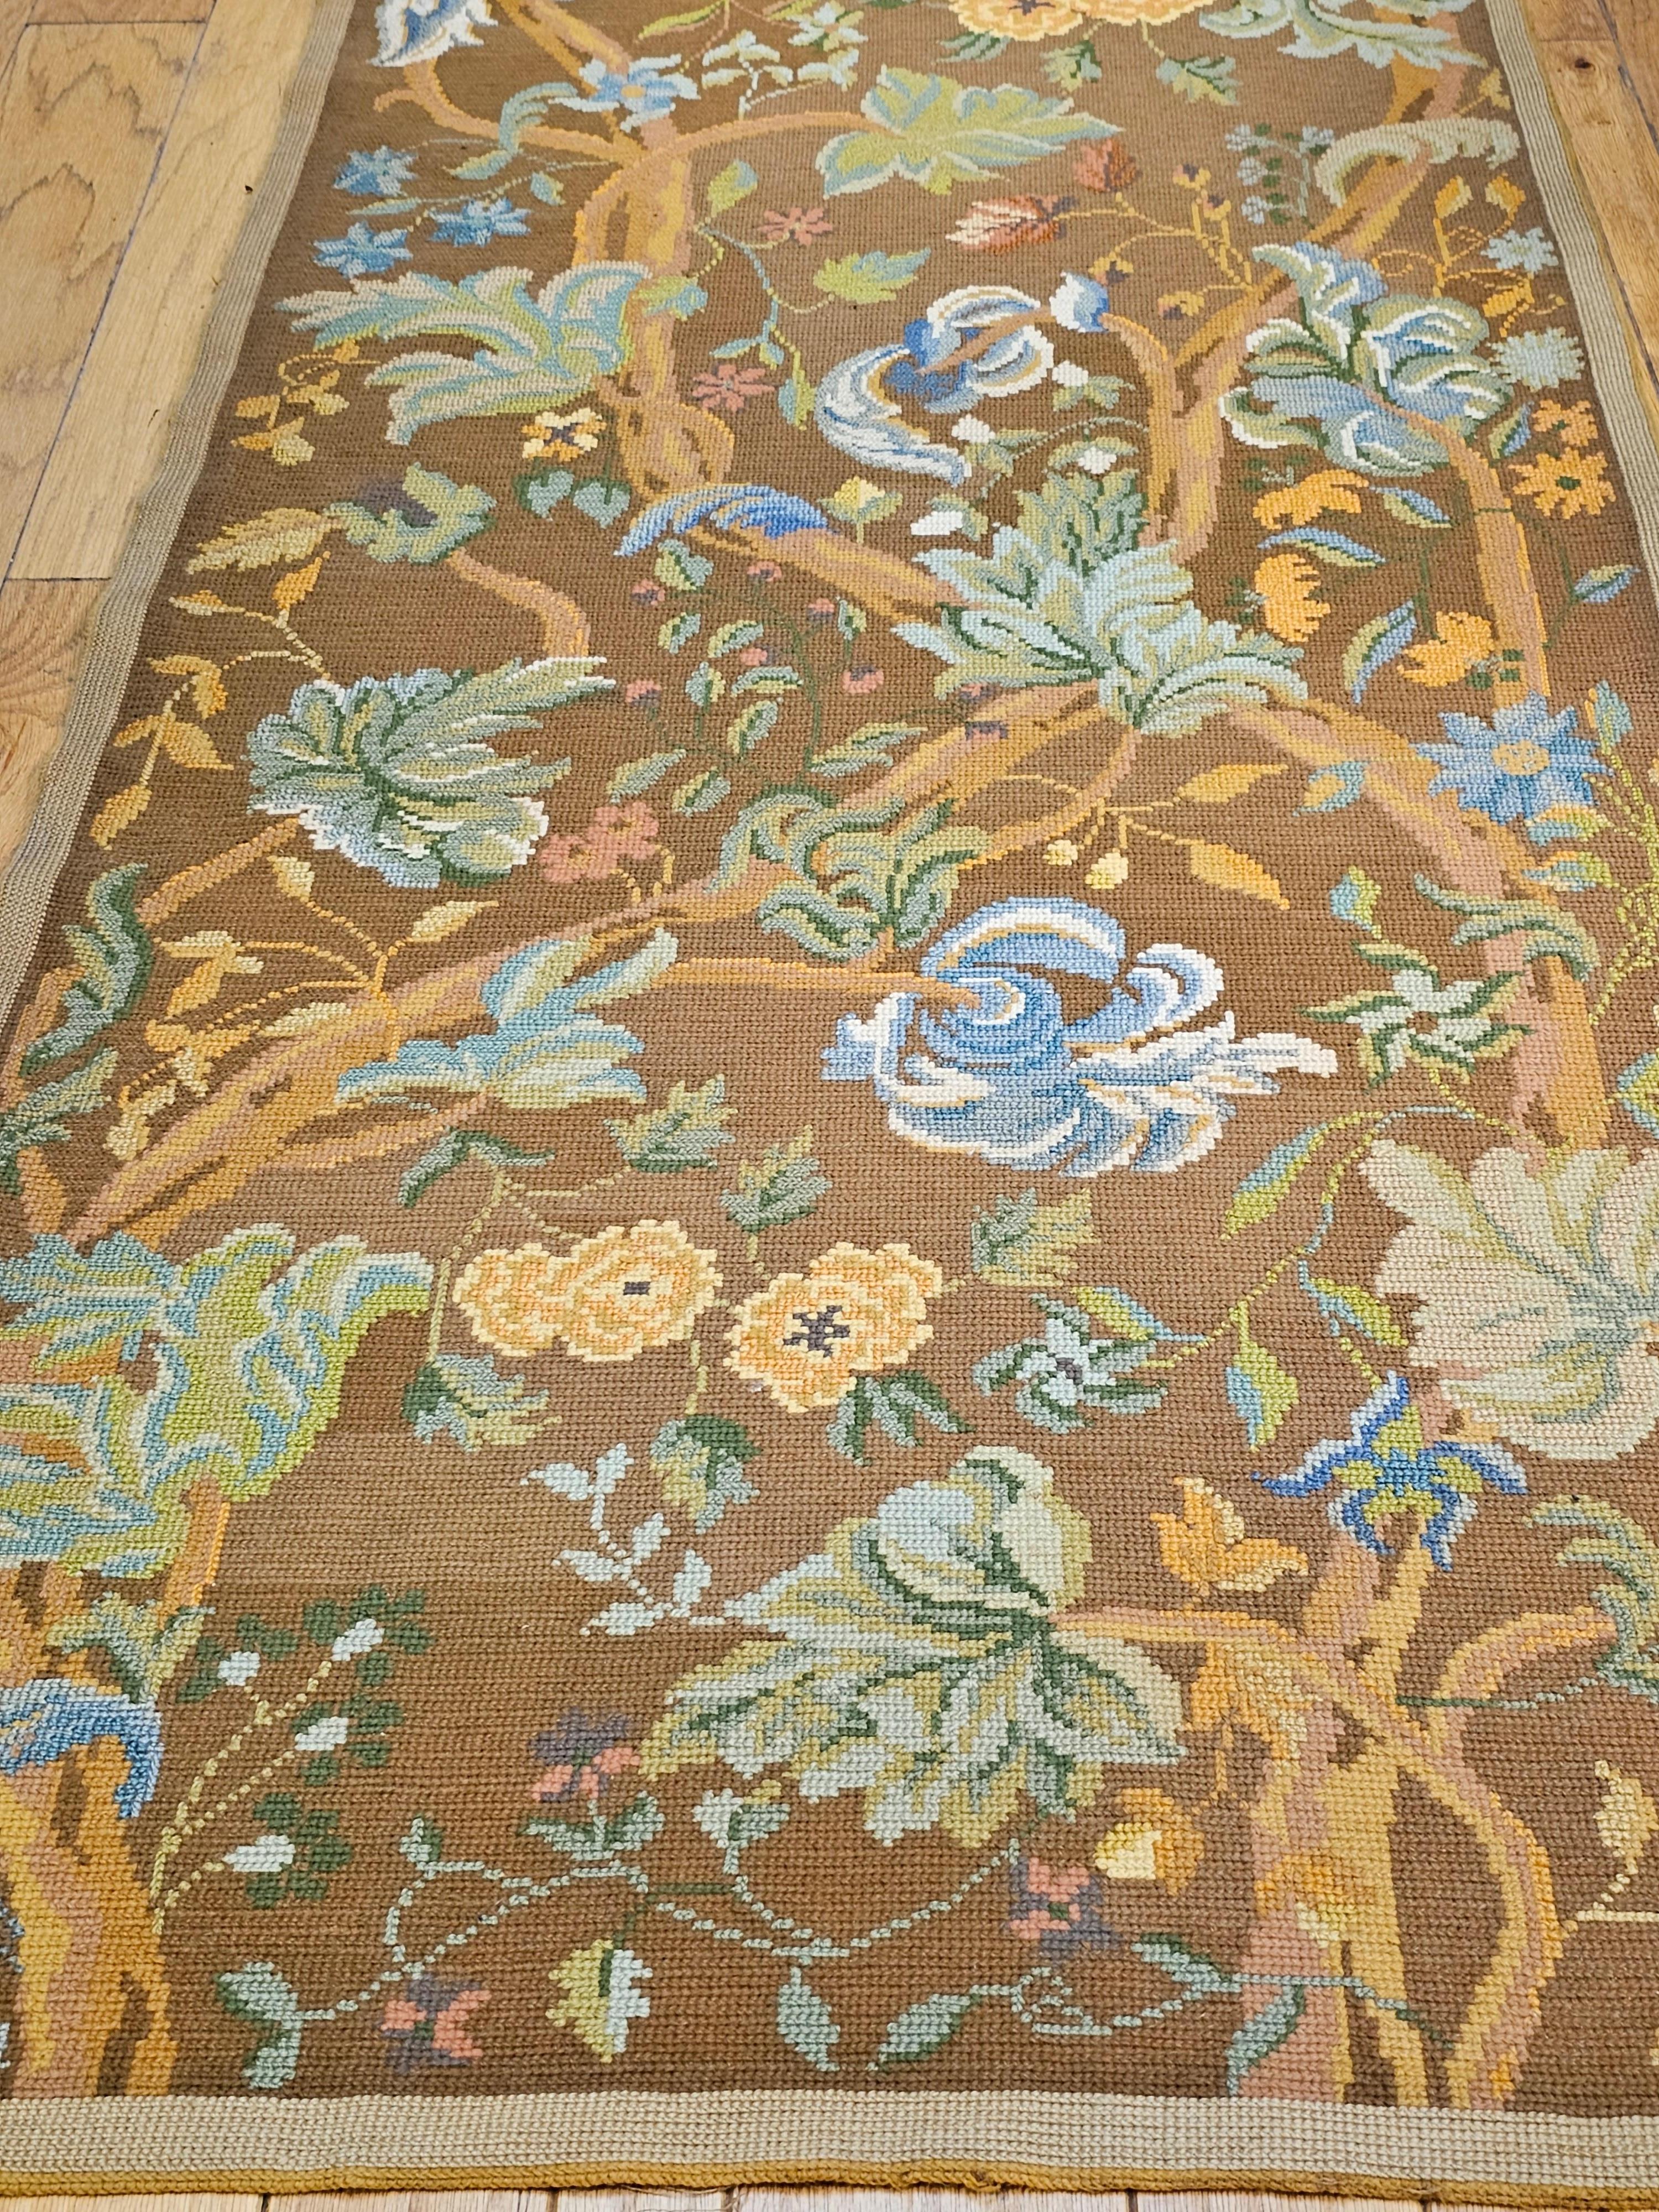 Vintage French Needlepoint Runner in Floral Pattern in Green, Blue, Brown, Pink In Good Condition For Sale In Barrington, IL